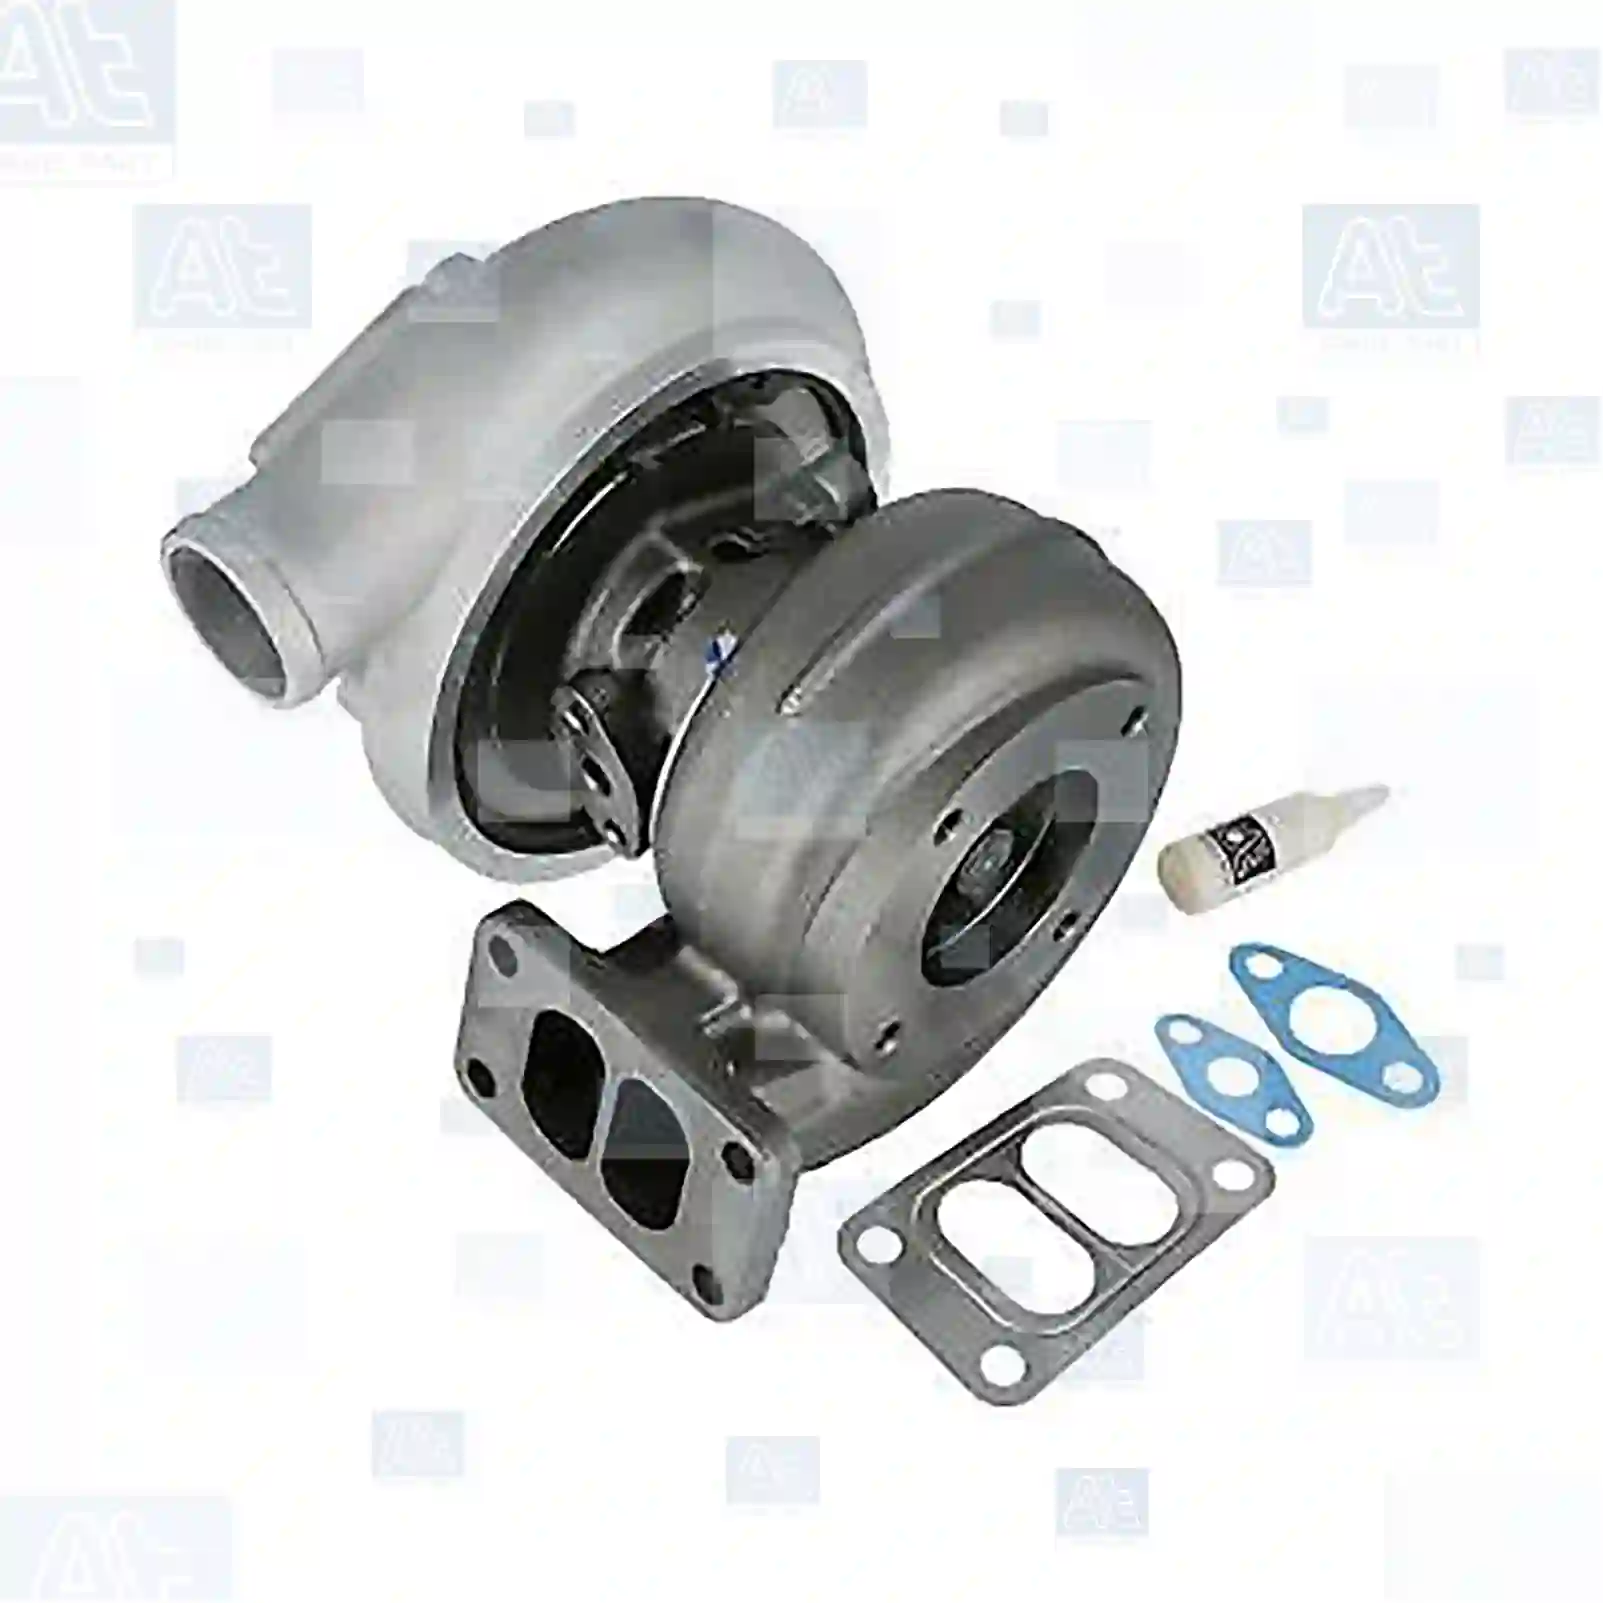 Turbocharger, with gasket kit, at no 77700377, oem no: 51091007262, 51091007278, 51091007299, 51091007314, 51091007316, 51091007324, 51091007333, 51091007341, 51091007342, 51091007344, 51091007345, 51091007387, 51091007447, 51091007448, 51091007449, 51091007450, 51091007456, 51091007457, 51091009278, 51091009299, 51091009314, 51091009316, 51091009333, 51091009387, 51091009447, 51091009449, 51091009450, 51091009457 At Spare Part | Engine, Accelerator Pedal, Camshaft, Connecting Rod, Crankcase, Crankshaft, Cylinder Head, Engine Suspension Mountings, Exhaust Manifold, Exhaust Gas Recirculation, Filter Kits, Flywheel Housing, General Overhaul Kits, Engine, Intake Manifold, Oil Cleaner, Oil Cooler, Oil Filter, Oil Pump, Oil Sump, Piston & Liner, Sensor & Switch, Timing Case, Turbocharger, Cooling System, Belt Tensioner, Coolant Filter, Coolant Pipe, Corrosion Prevention Agent, Drive, Expansion Tank, Fan, Intercooler, Monitors & Gauges, Radiator, Thermostat, V-Belt / Timing belt, Water Pump, Fuel System, Electronical Injector Unit, Feed Pump, Fuel Filter, cpl., Fuel Gauge Sender,  Fuel Line, Fuel Pump, Fuel Tank, Injection Line Kit, Injection Pump, Exhaust System, Clutch & Pedal, Gearbox, Propeller Shaft, Axles, Brake System, Hubs & Wheels, Suspension, Leaf Spring, Universal Parts / Accessories, Steering, Electrical System, Cabin Turbocharger, with gasket kit, at no 77700377, oem no: 51091007262, 51091007278, 51091007299, 51091007314, 51091007316, 51091007324, 51091007333, 51091007341, 51091007342, 51091007344, 51091007345, 51091007387, 51091007447, 51091007448, 51091007449, 51091007450, 51091007456, 51091007457, 51091009278, 51091009299, 51091009314, 51091009316, 51091009333, 51091009387, 51091009447, 51091009449, 51091009450, 51091009457 At Spare Part | Engine, Accelerator Pedal, Camshaft, Connecting Rod, Crankcase, Crankshaft, Cylinder Head, Engine Suspension Mountings, Exhaust Manifold, Exhaust Gas Recirculation, Filter Kits, Flywheel Housing, General Overhaul Kits, Engine, Intake Manifold, Oil Cleaner, Oil Cooler, Oil Filter, Oil Pump, Oil Sump, Piston & Liner, Sensor & Switch, Timing Case, Turbocharger, Cooling System, Belt Tensioner, Coolant Filter, Coolant Pipe, Corrosion Prevention Agent, Drive, Expansion Tank, Fan, Intercooler, Monitors & Gauges, Radiator, Thermostat, V-Belt / Timing belt, Water Pump, Fuel System, Electronical Injector Unit, Feed Pump, Fuel Filter, cpl., Fuel Gauge Sender,  Fuel Line, Fuel Pump, Fuel Tank, Injection Line Kit, Injection Pump, Exhaust System, Clutch & Pedal, Gearbox, Propeller Shaft, Axles, Brake System, Hubs & Wheels, Suspension, Leaf Spring, Universal Parts / Accessories, Steering, Electrical System, Cabin